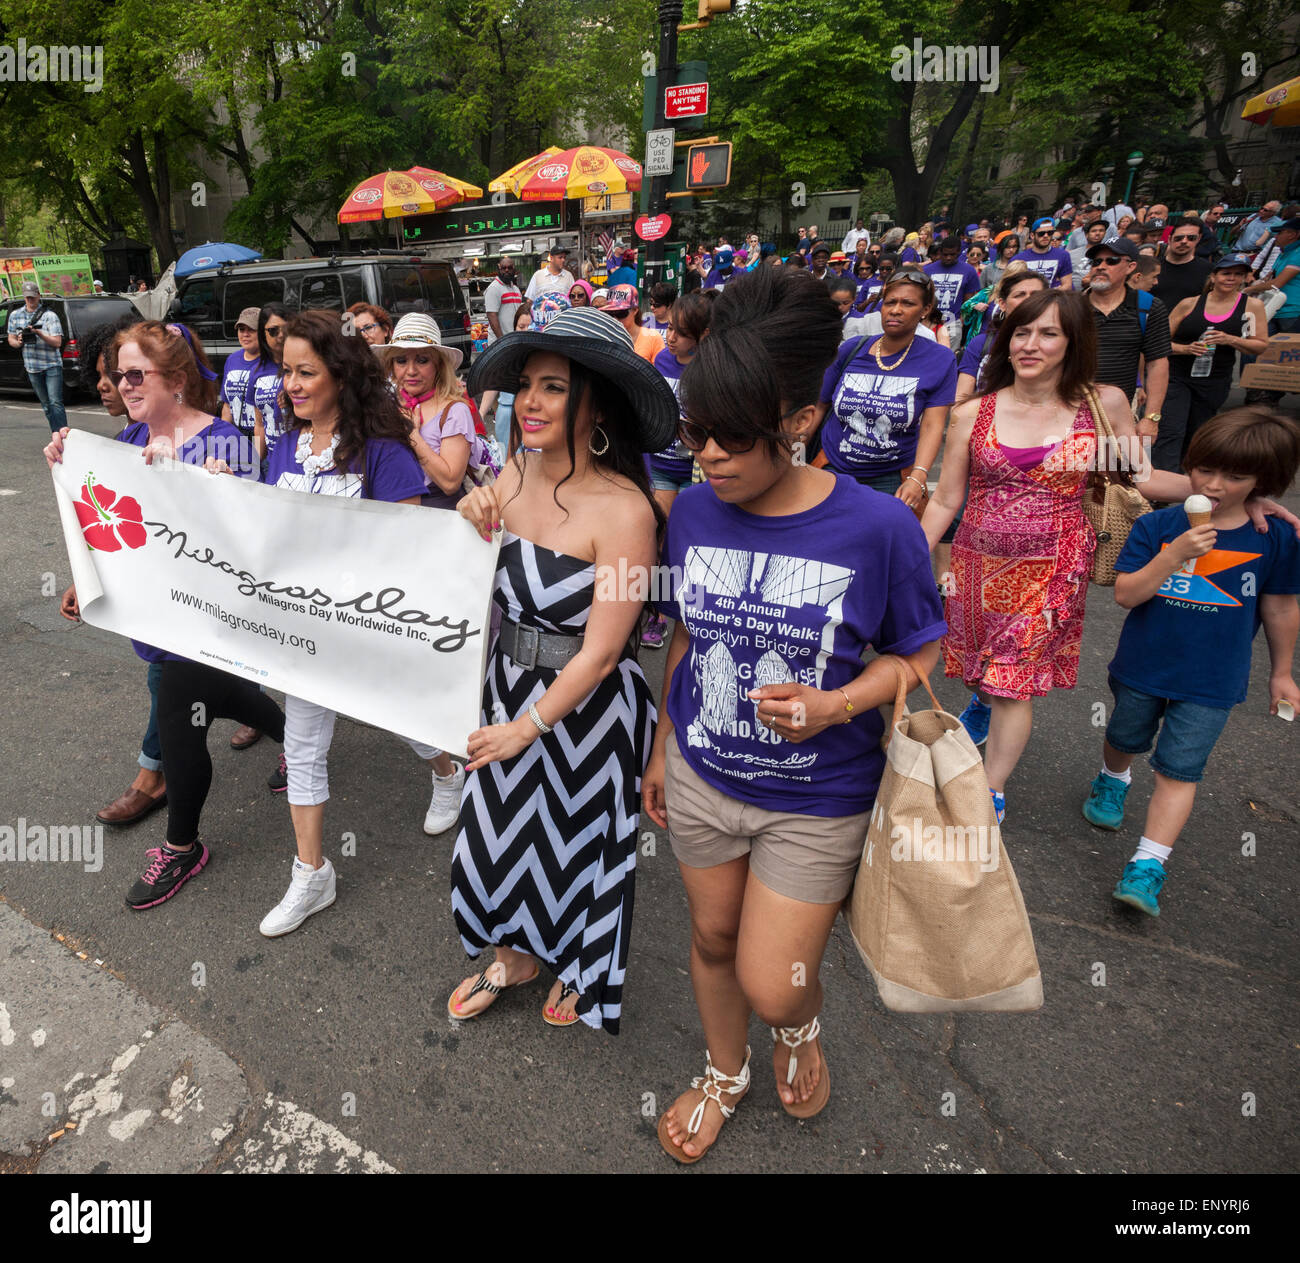 Members and supporters of the group Milagros Day Worldwide participate in their Mother's Day Walk against domestic violence starting at City Hall in New York on Mother's Day, Sunday, May 10, 2015. Several hundred men, women and children, some of them victims,  participated in their warm up pep rally and walked across the bridge to raise money and awareness for the victims of domestic violence. (© Richard B. Levine) Stock Photo